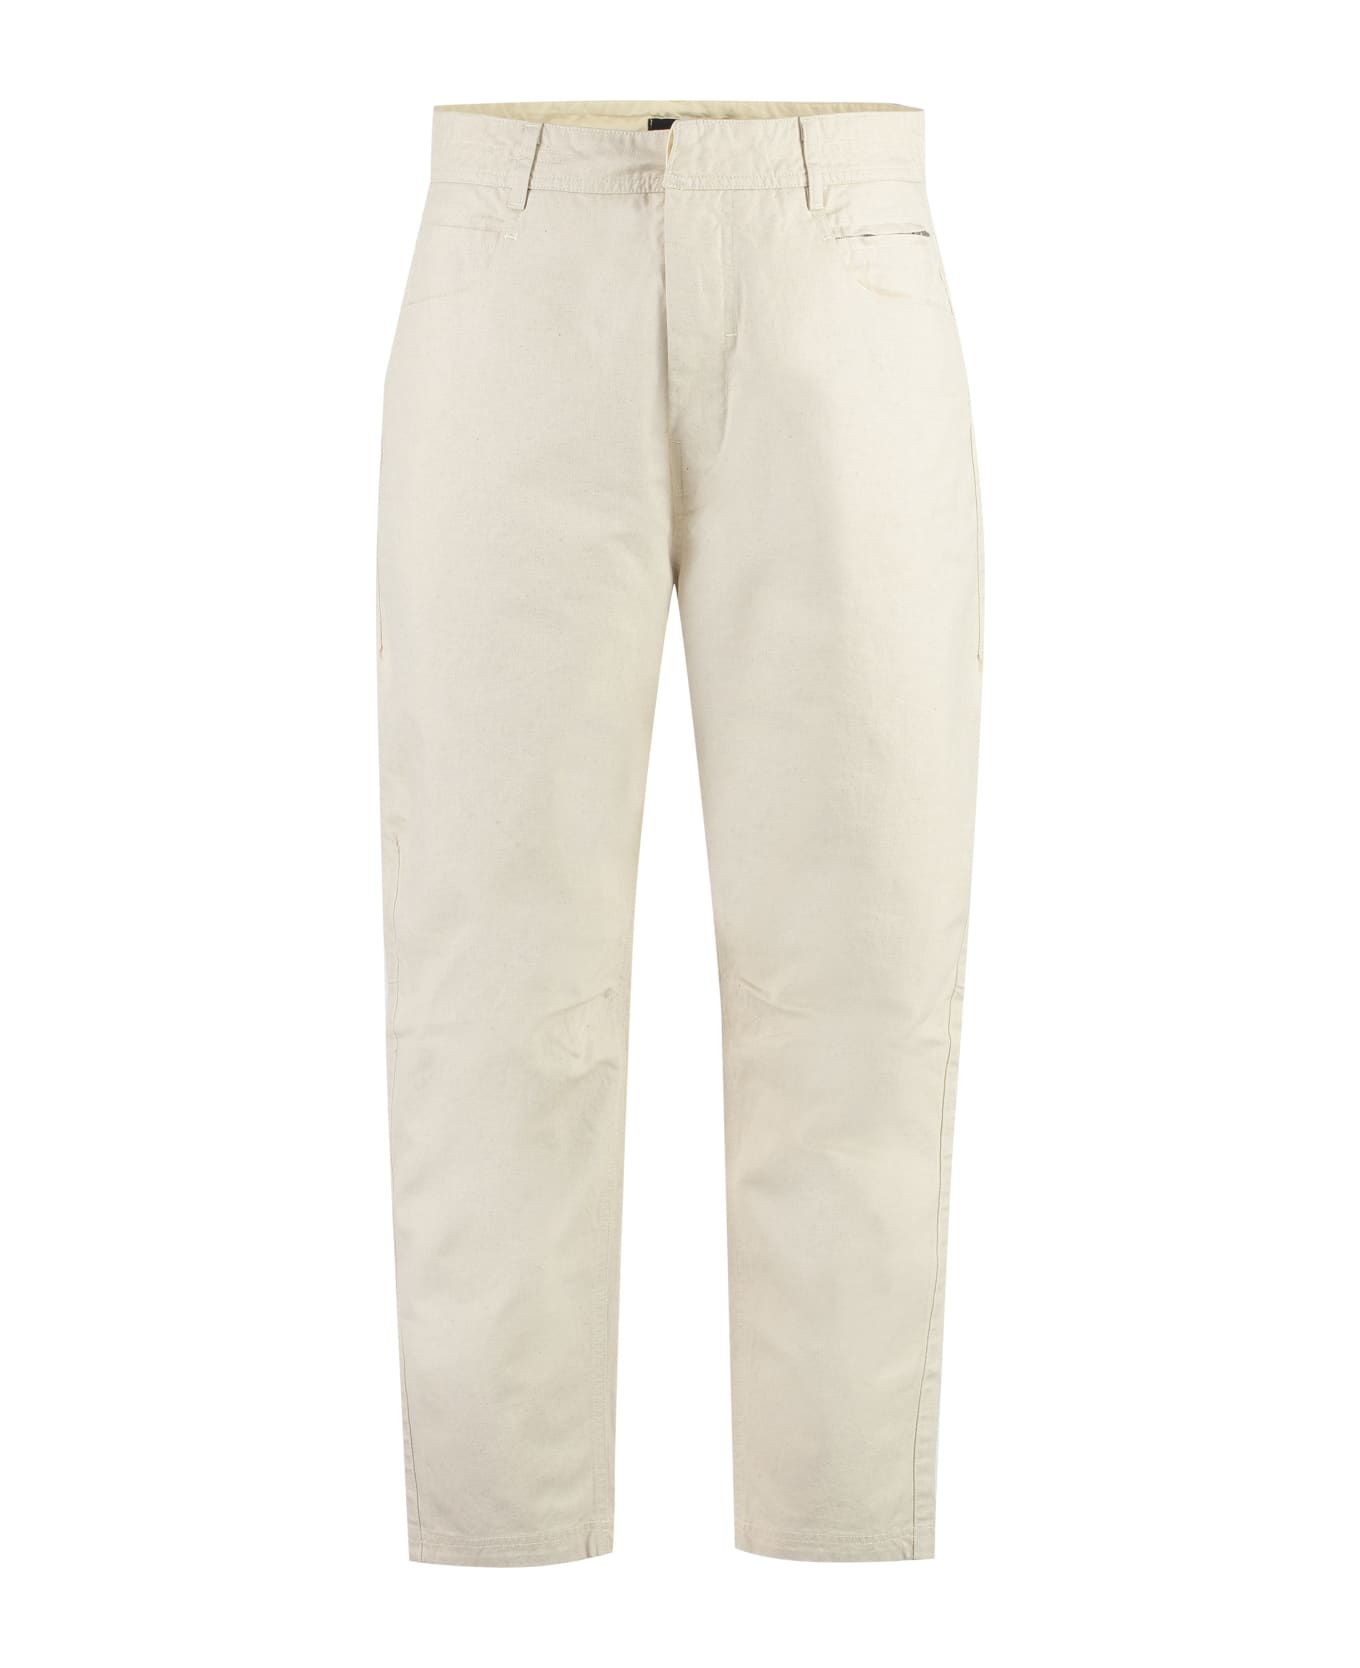 Stone Island Shadow Project Cotton Blend Trousers - Sand ボトムス